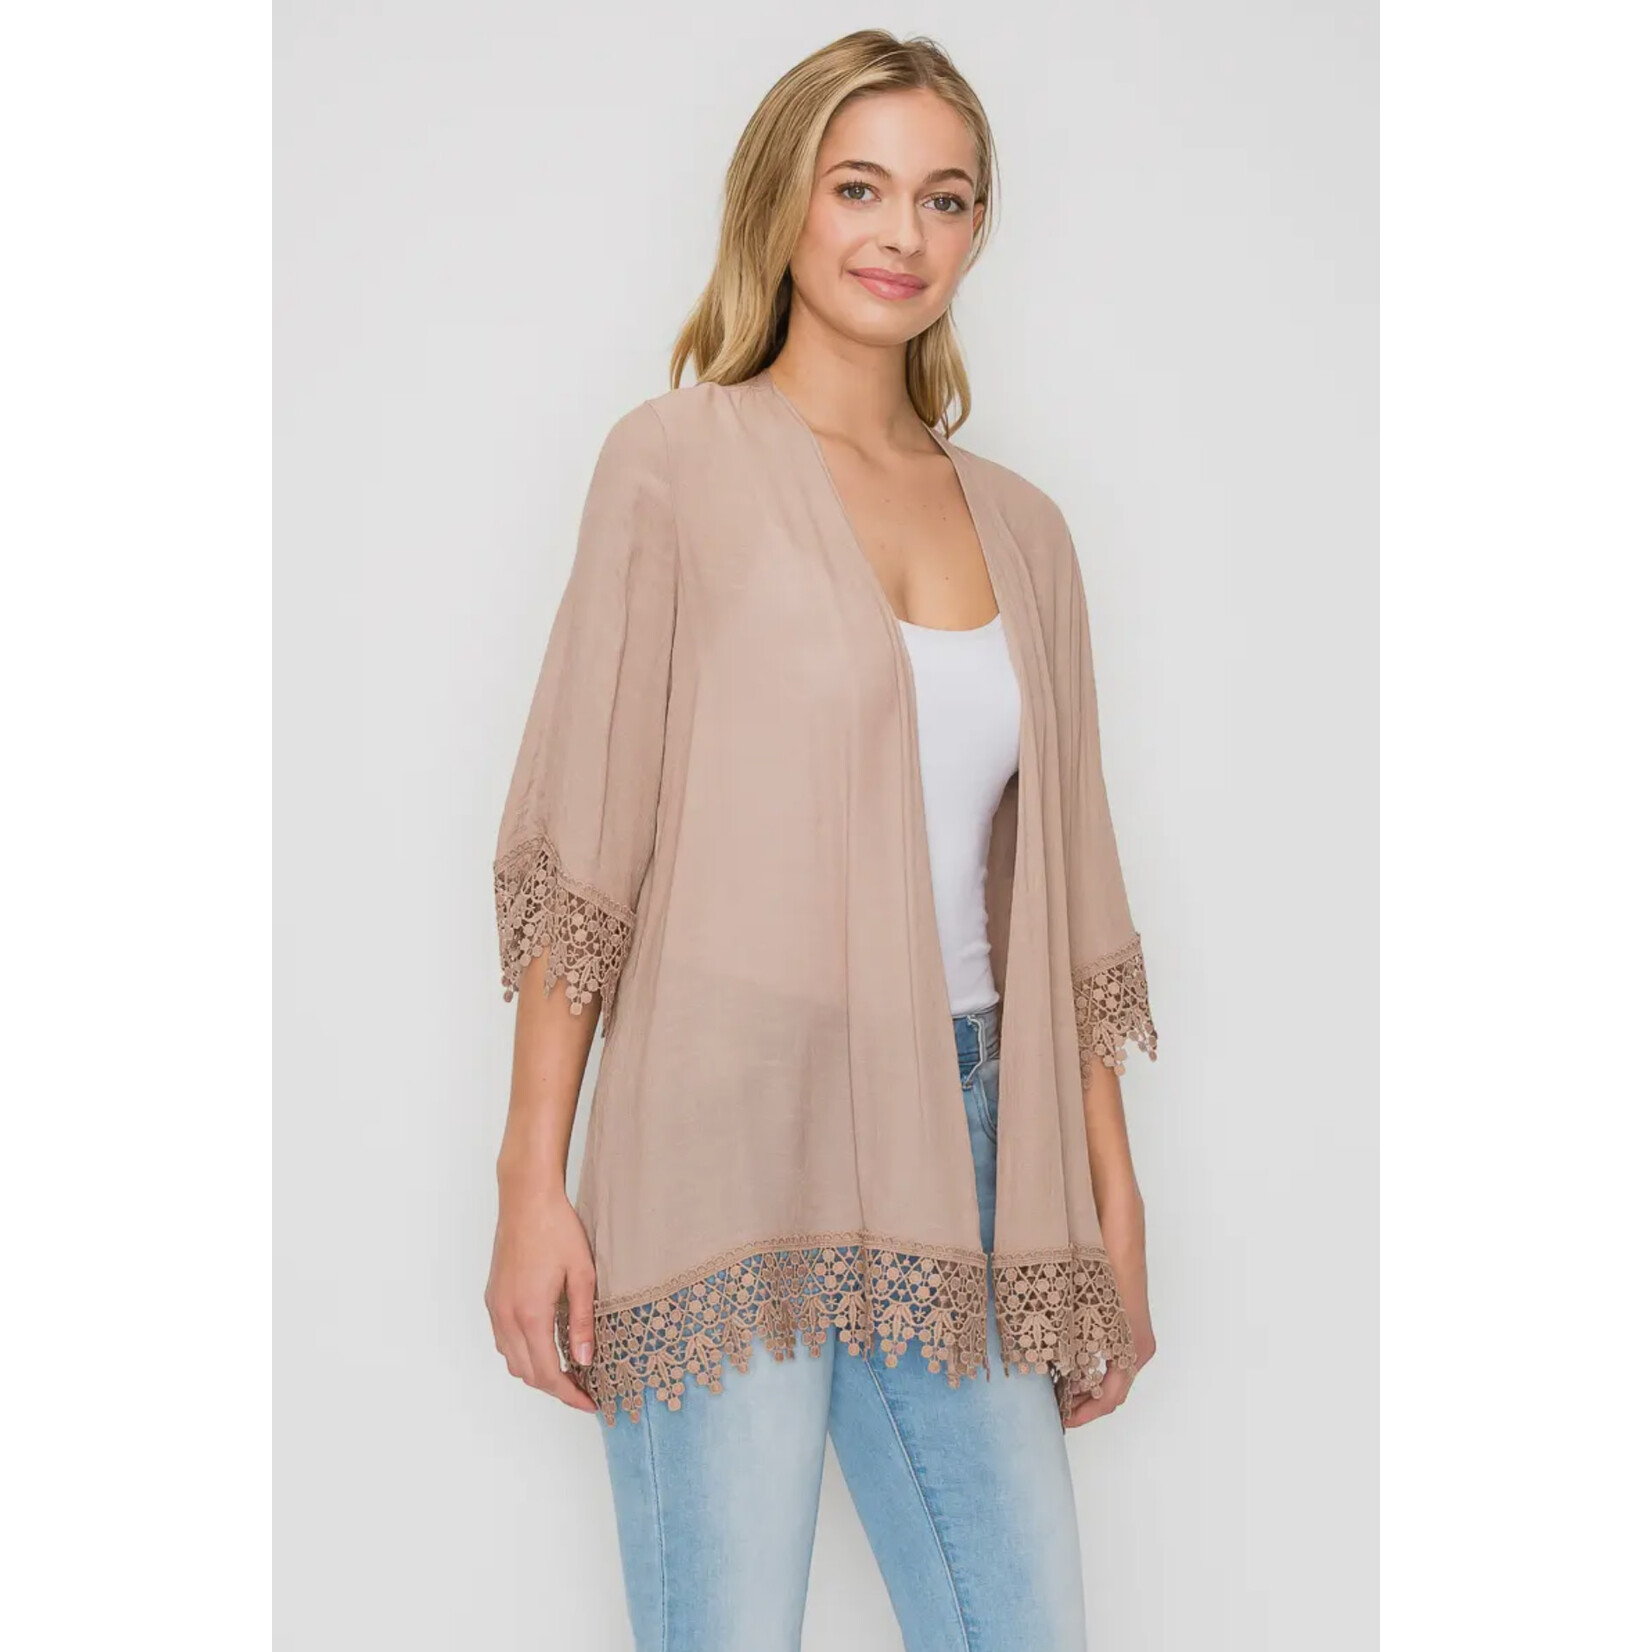 Perseption - Faire Crochet-Trim 3/4 Sleeve Woven Cardigan - Taupe